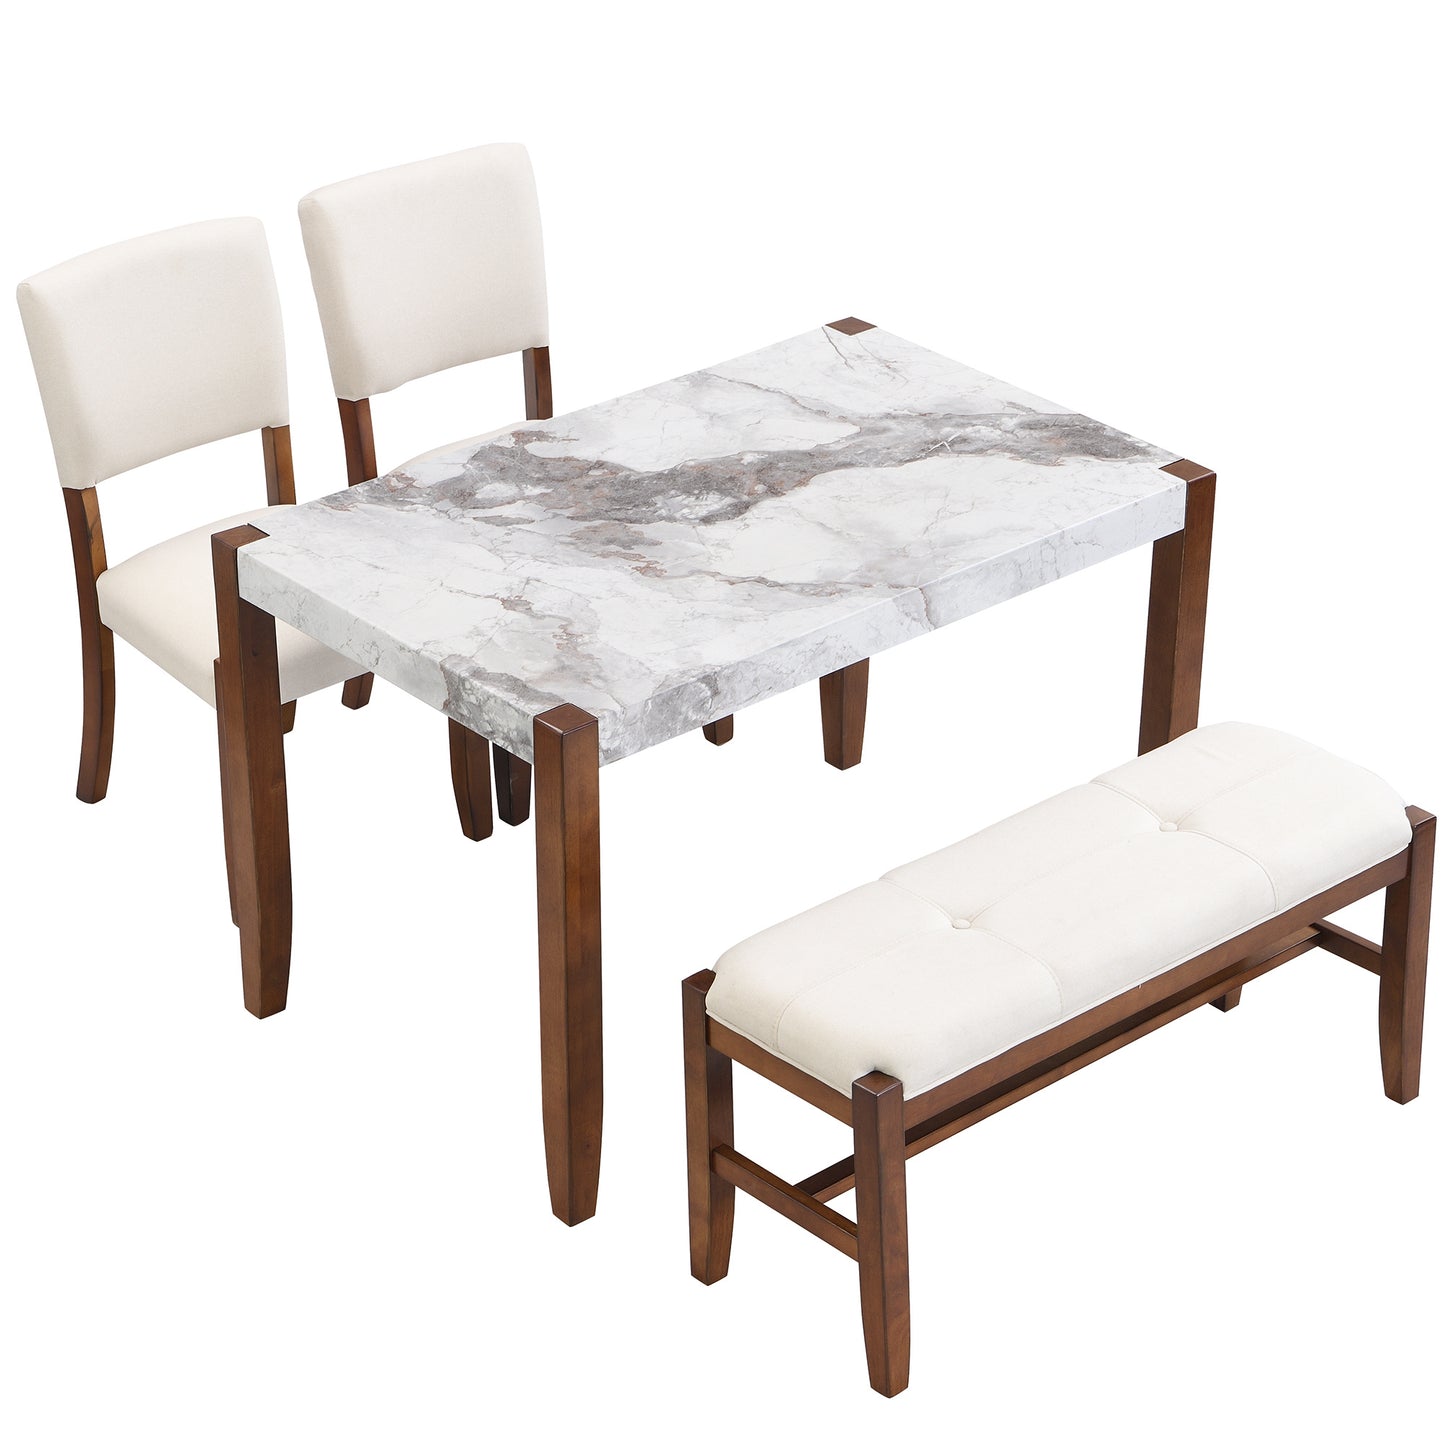 4-piece modern dining furniture set  46" faux marble style